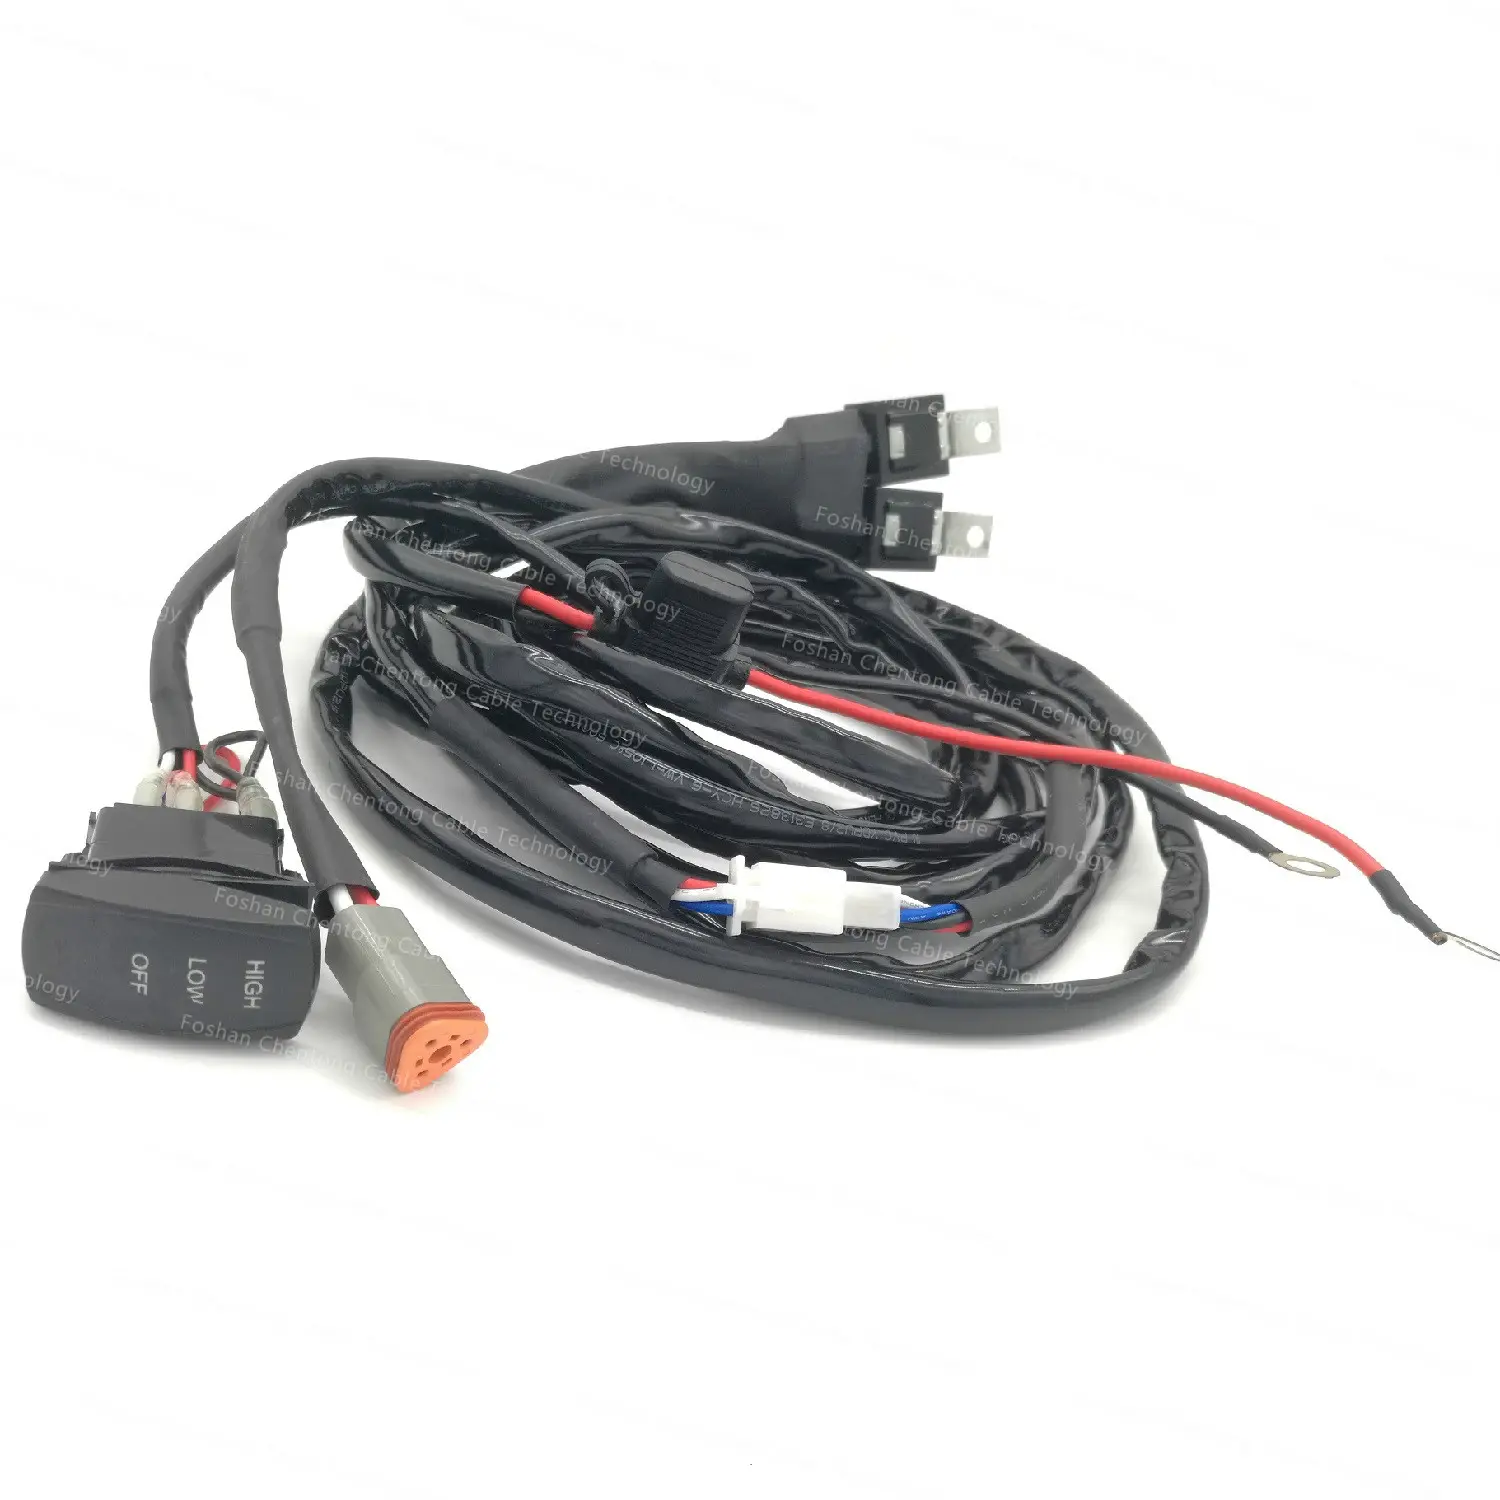 Automobile Plug and Play Wiring Harness Kit Assembly 2 Leads for 12V LED Light Control With On Off Switch Relay Blade Fuse